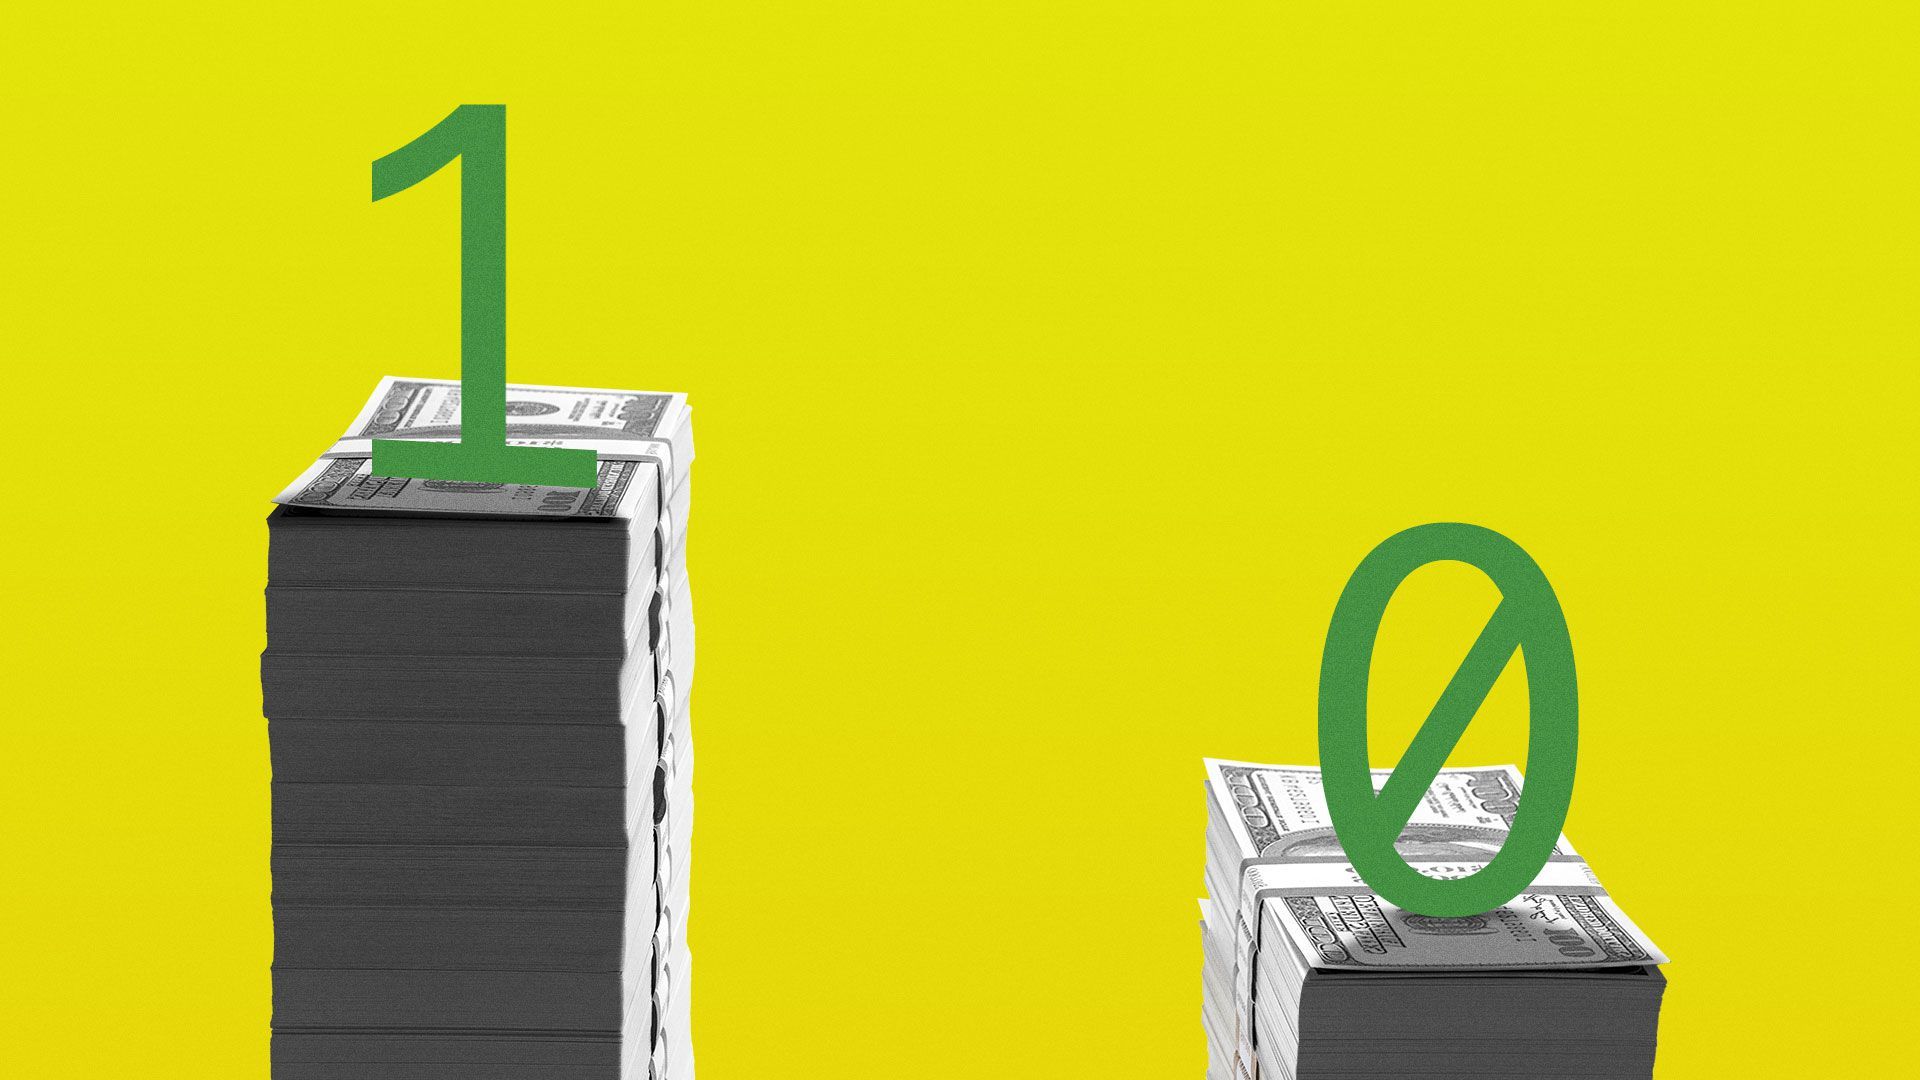 Illustration of 1 standing o large stack of money. The 0 is on a smaller stack of money.